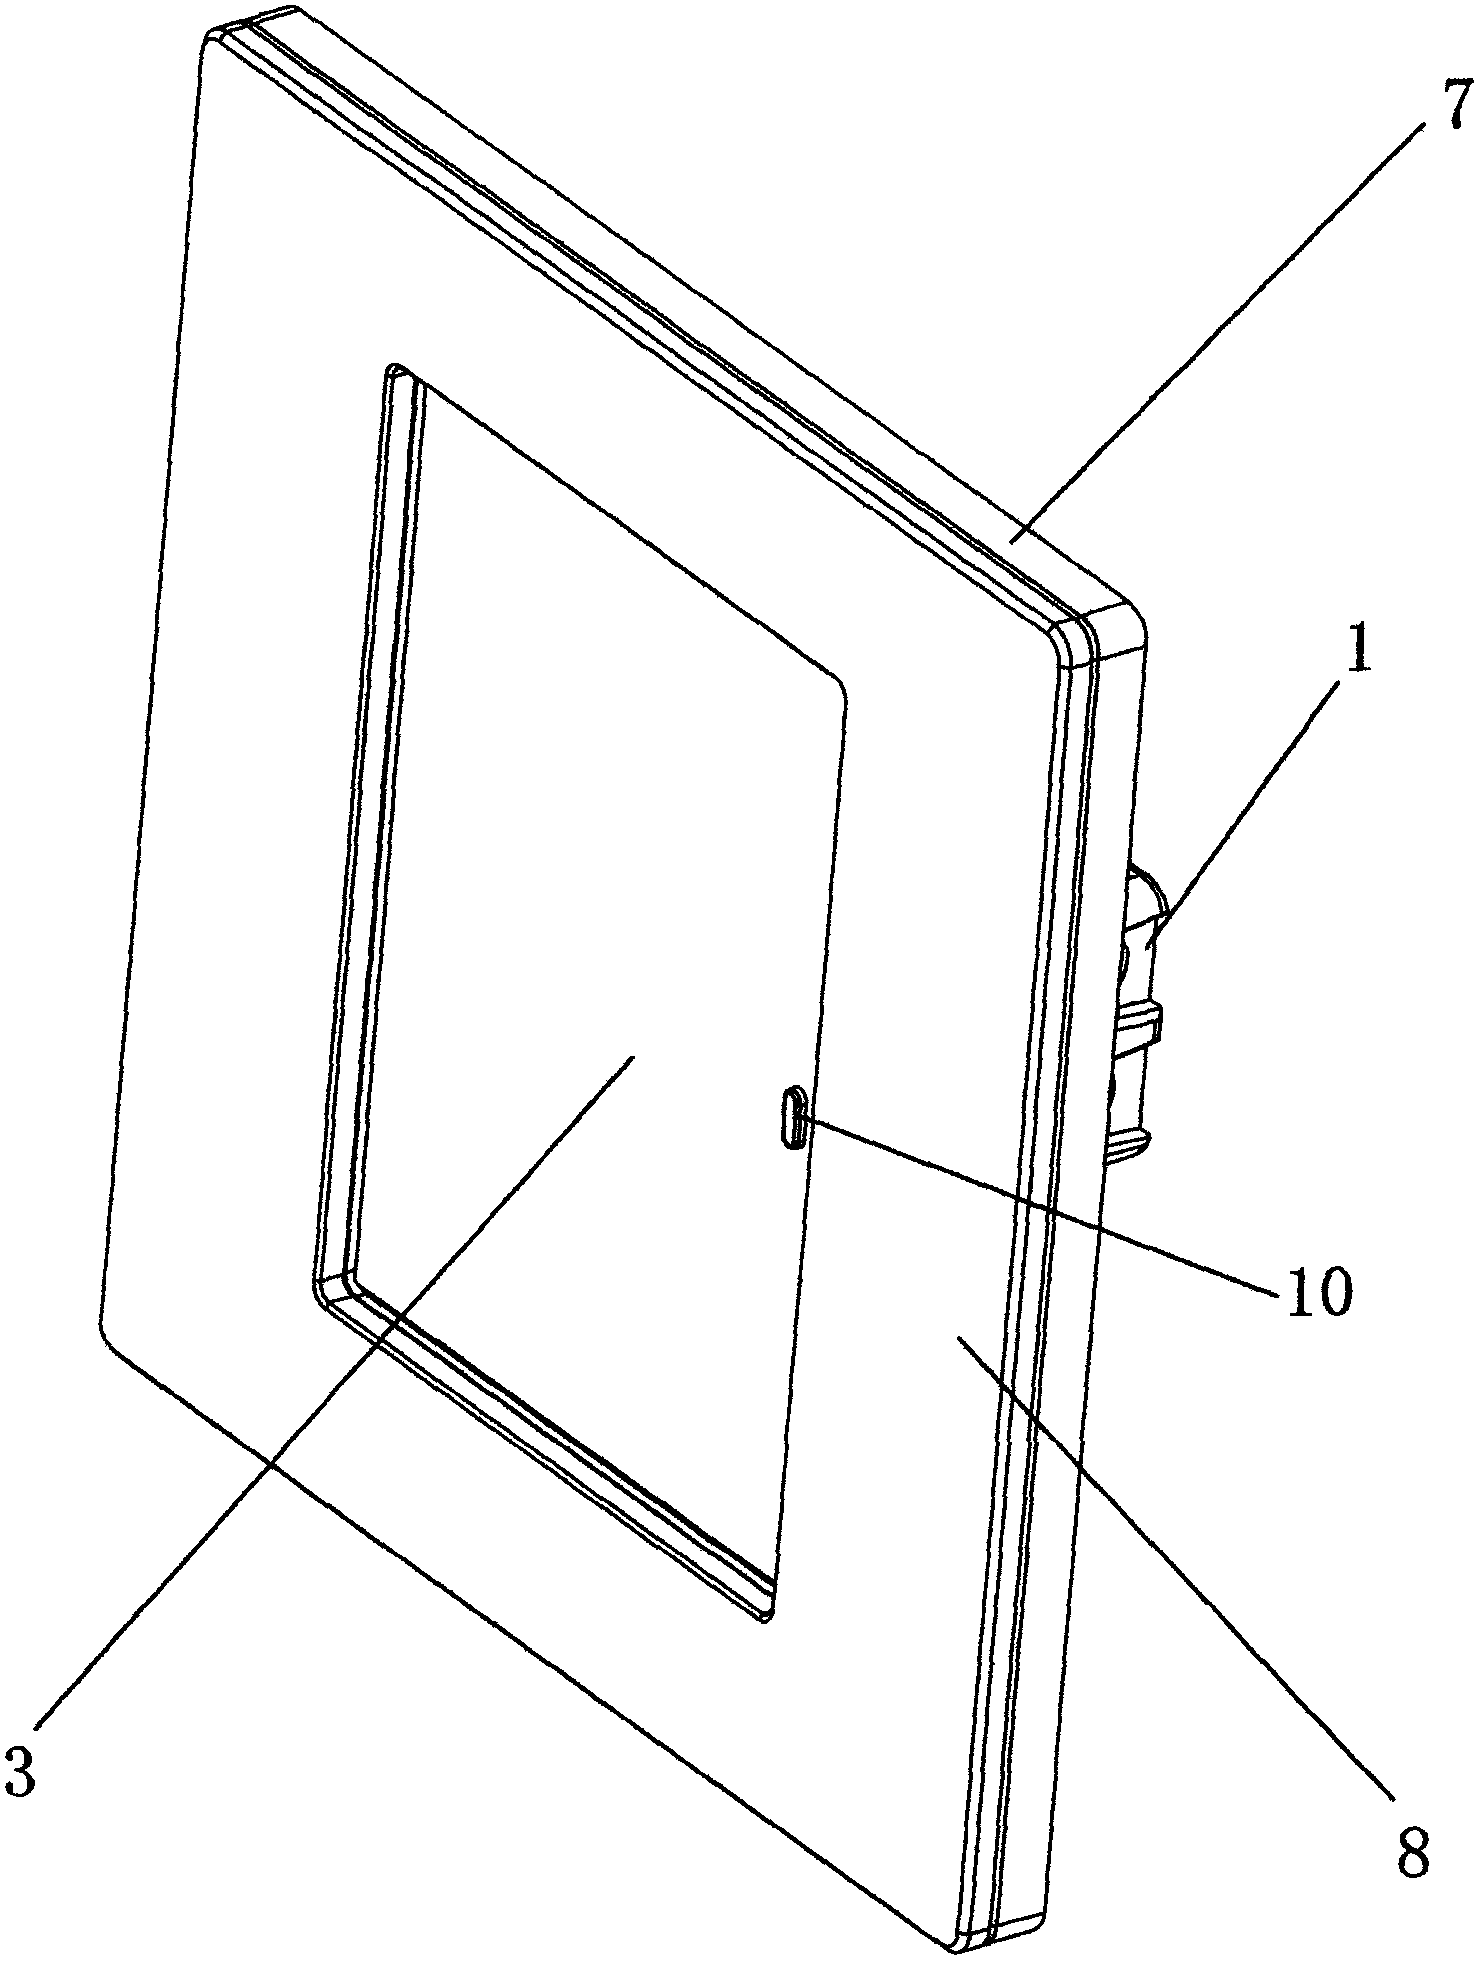 Arbitrary point-pressing panel switch